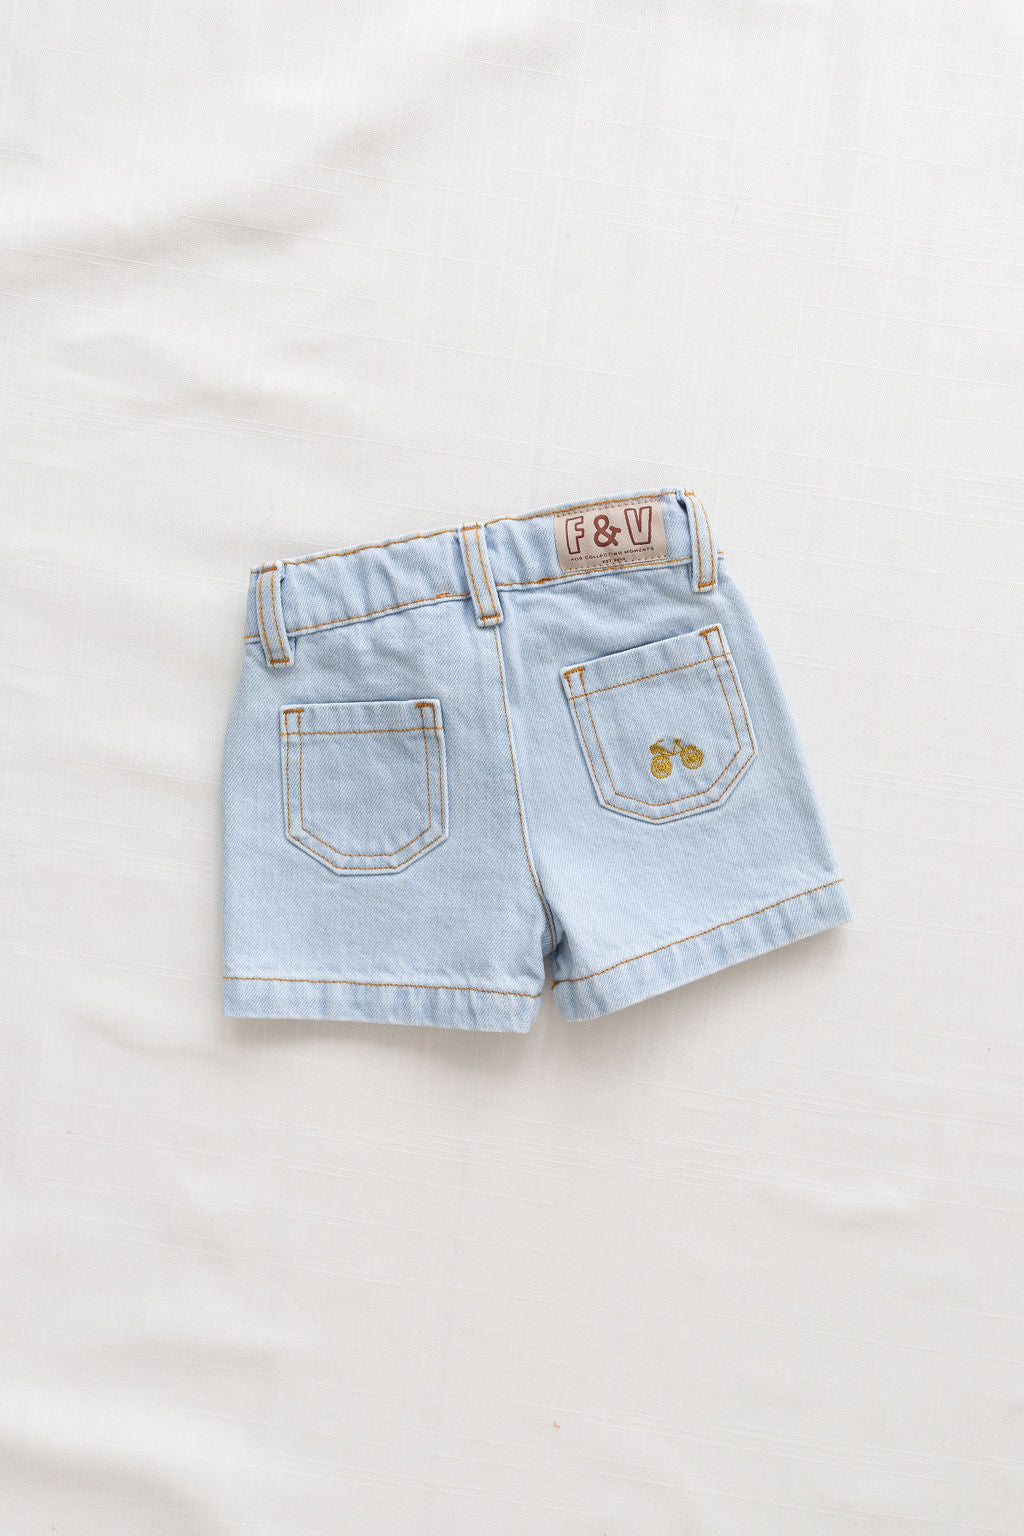 Fin & Vince Vintage Denim Shorts with Embroidery